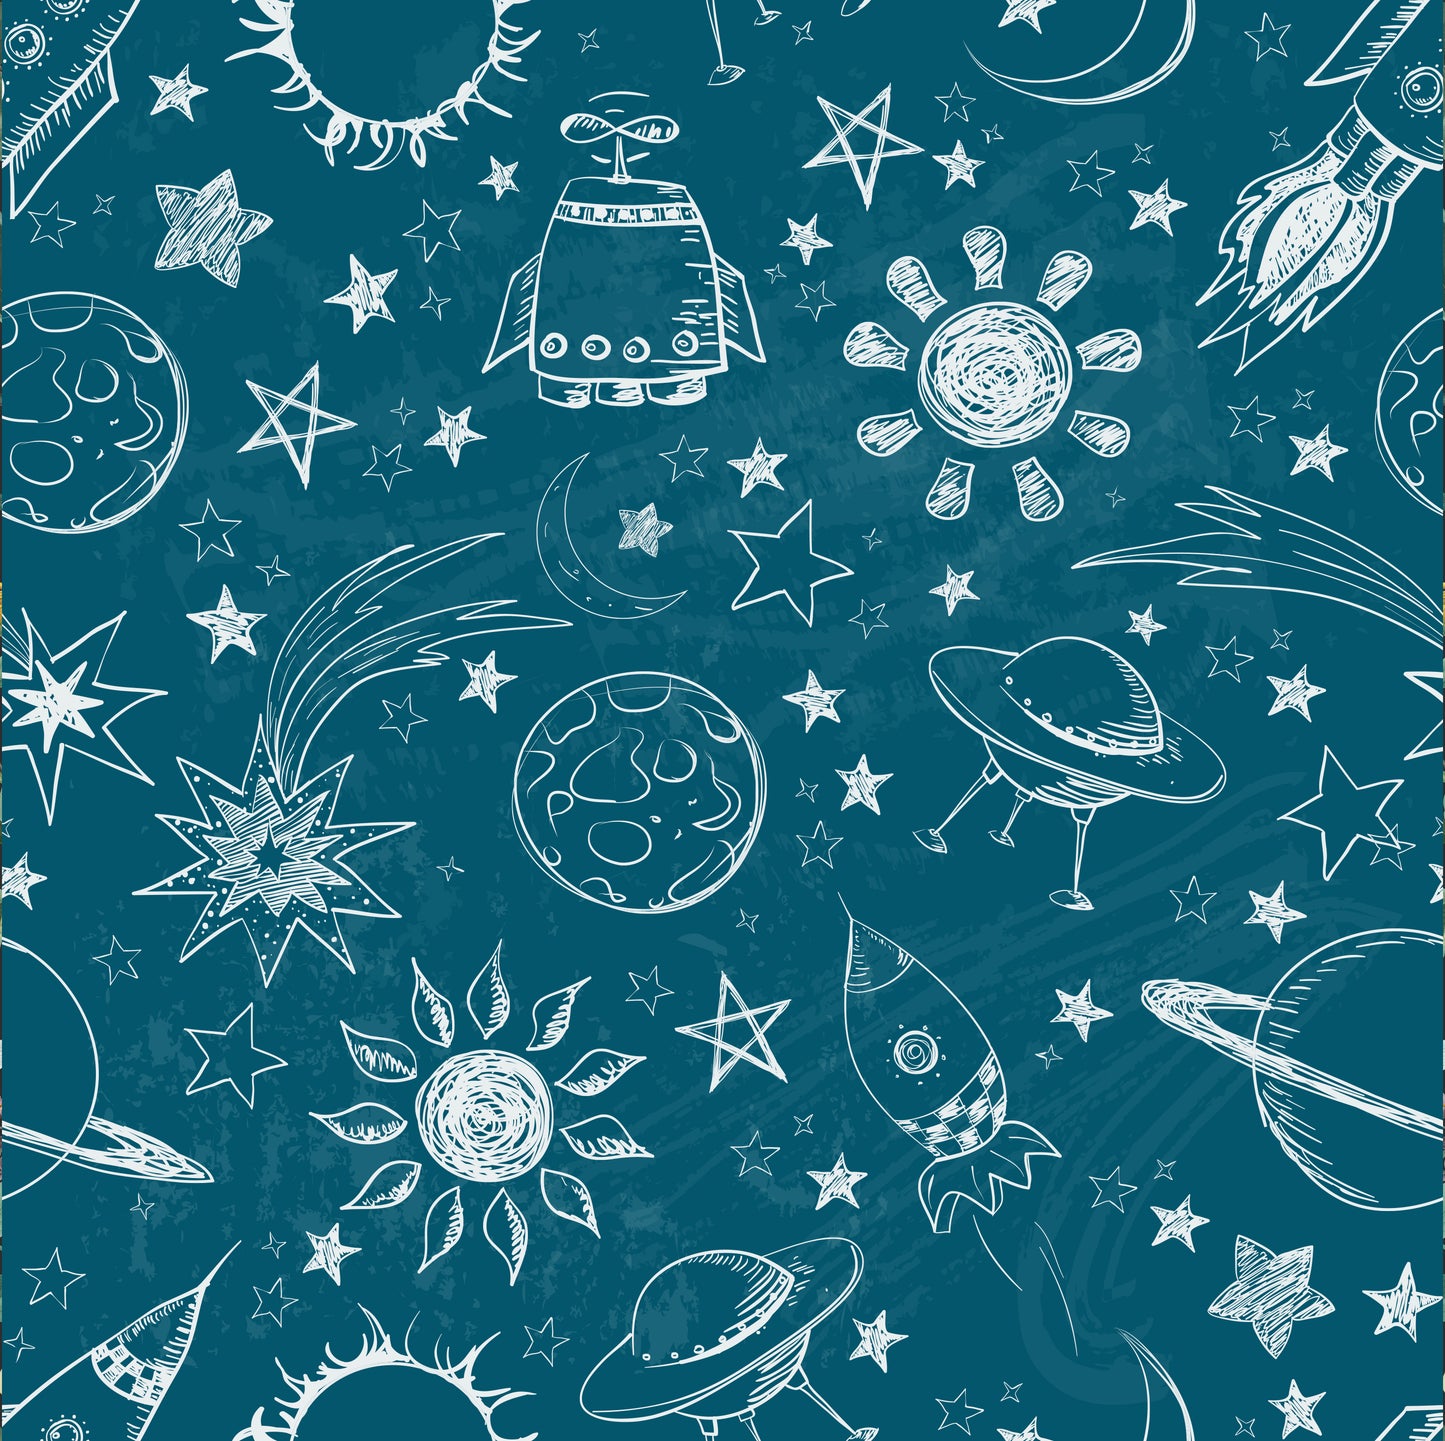 Intergalactic Space Themed Removable Peel And Stick Wallpaper